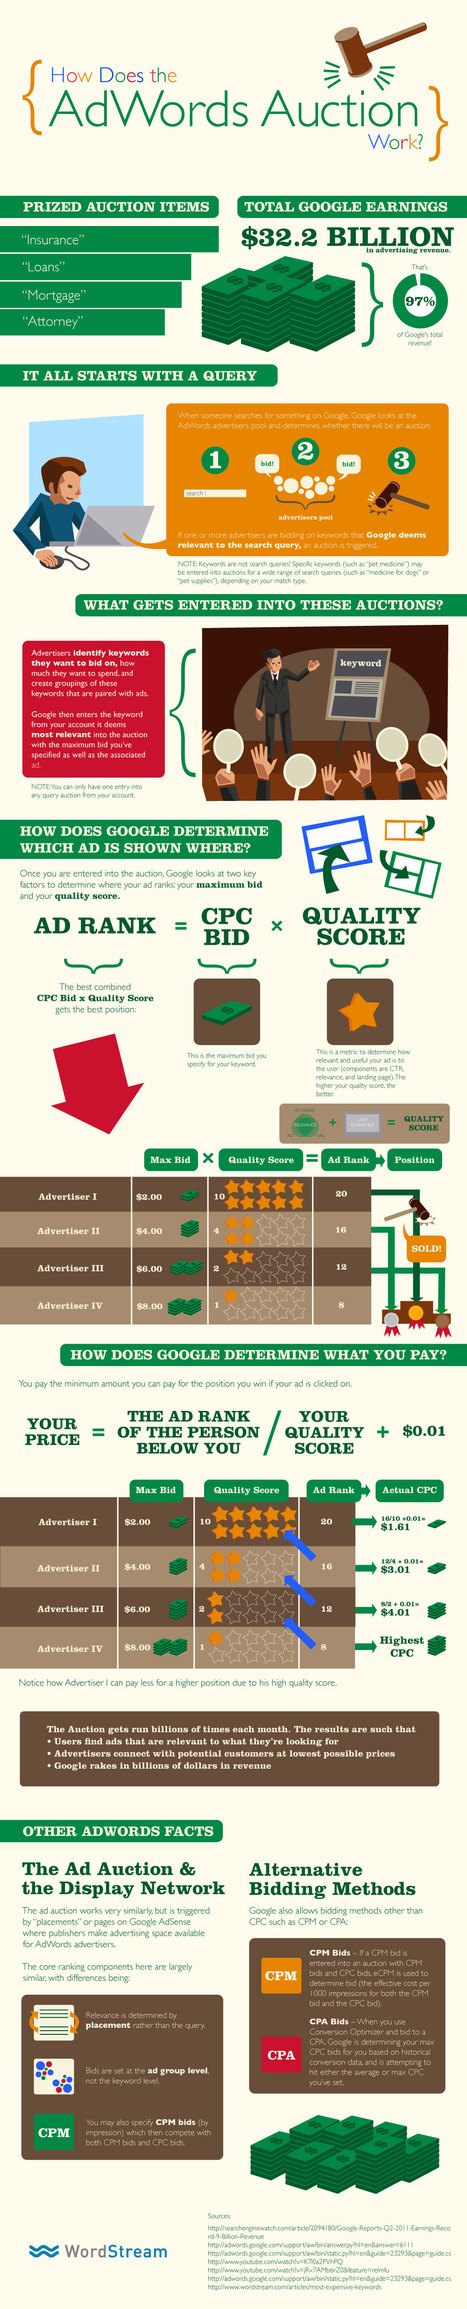 INFOGRAPHIC: What Is Google AdWords? How the AdWords Auction Works | WEBOLUTION! | Scoop.it